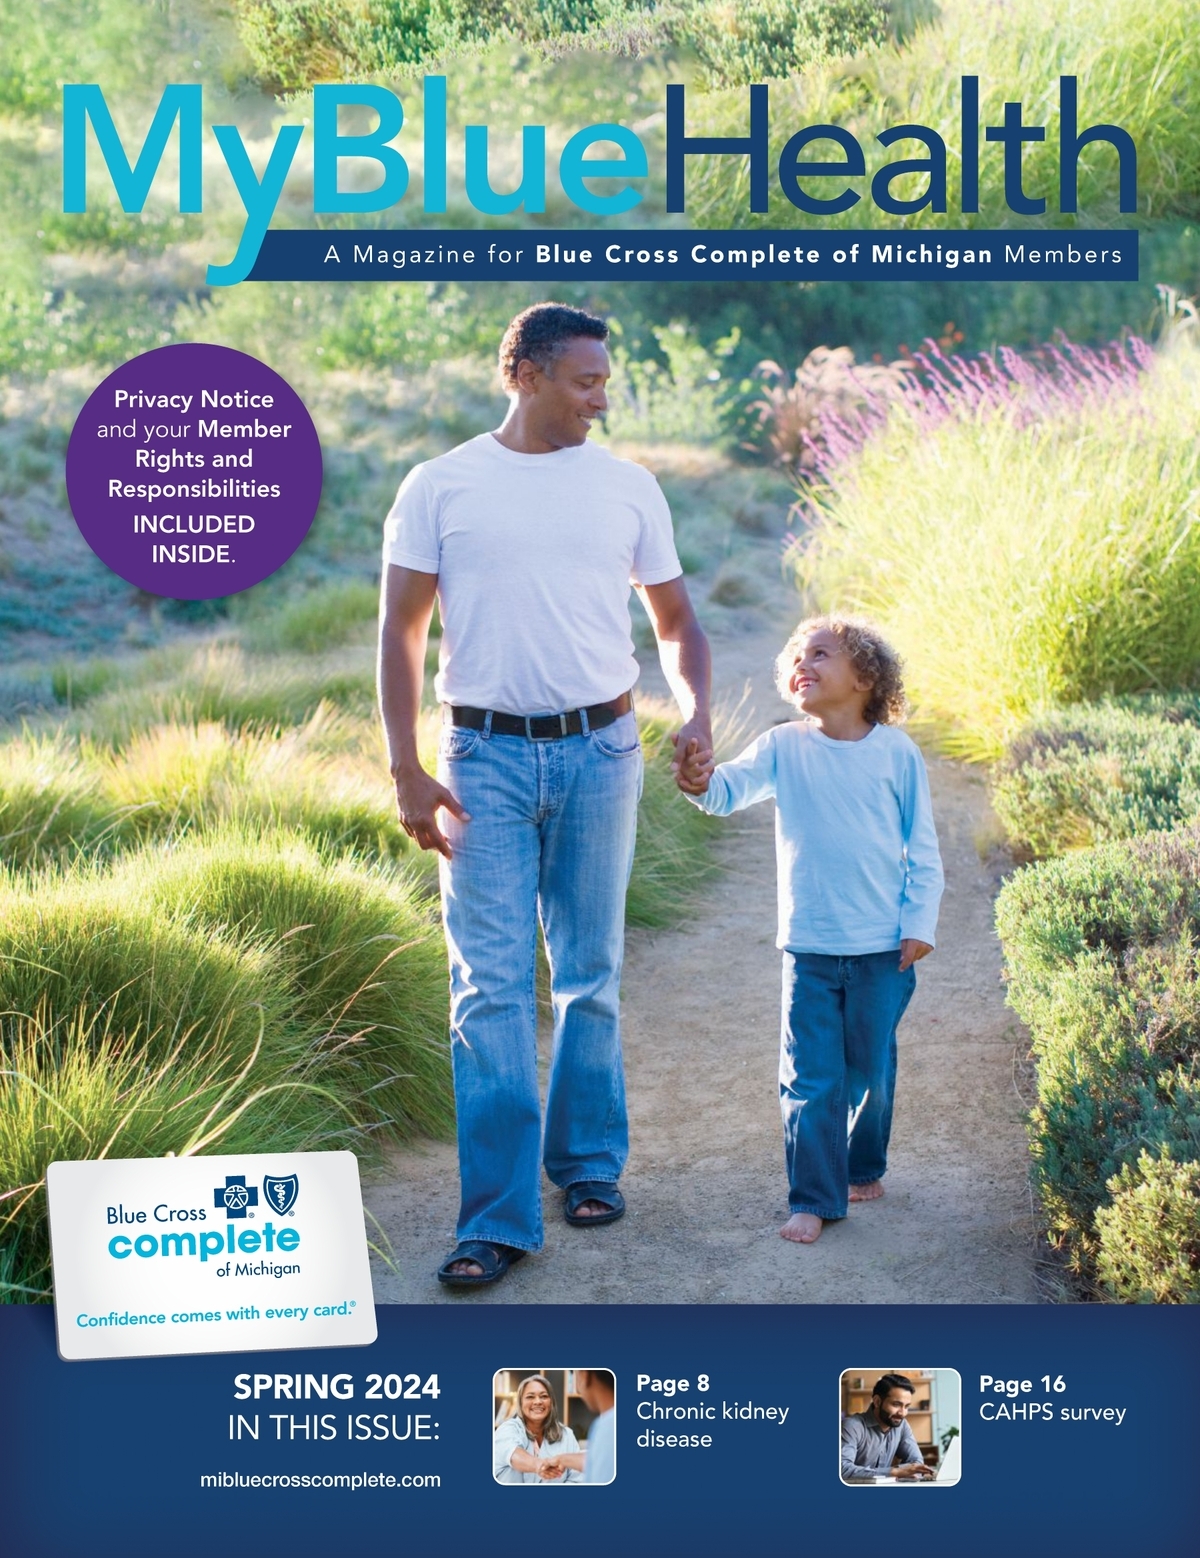 My Blue Health Spring 2024 cover